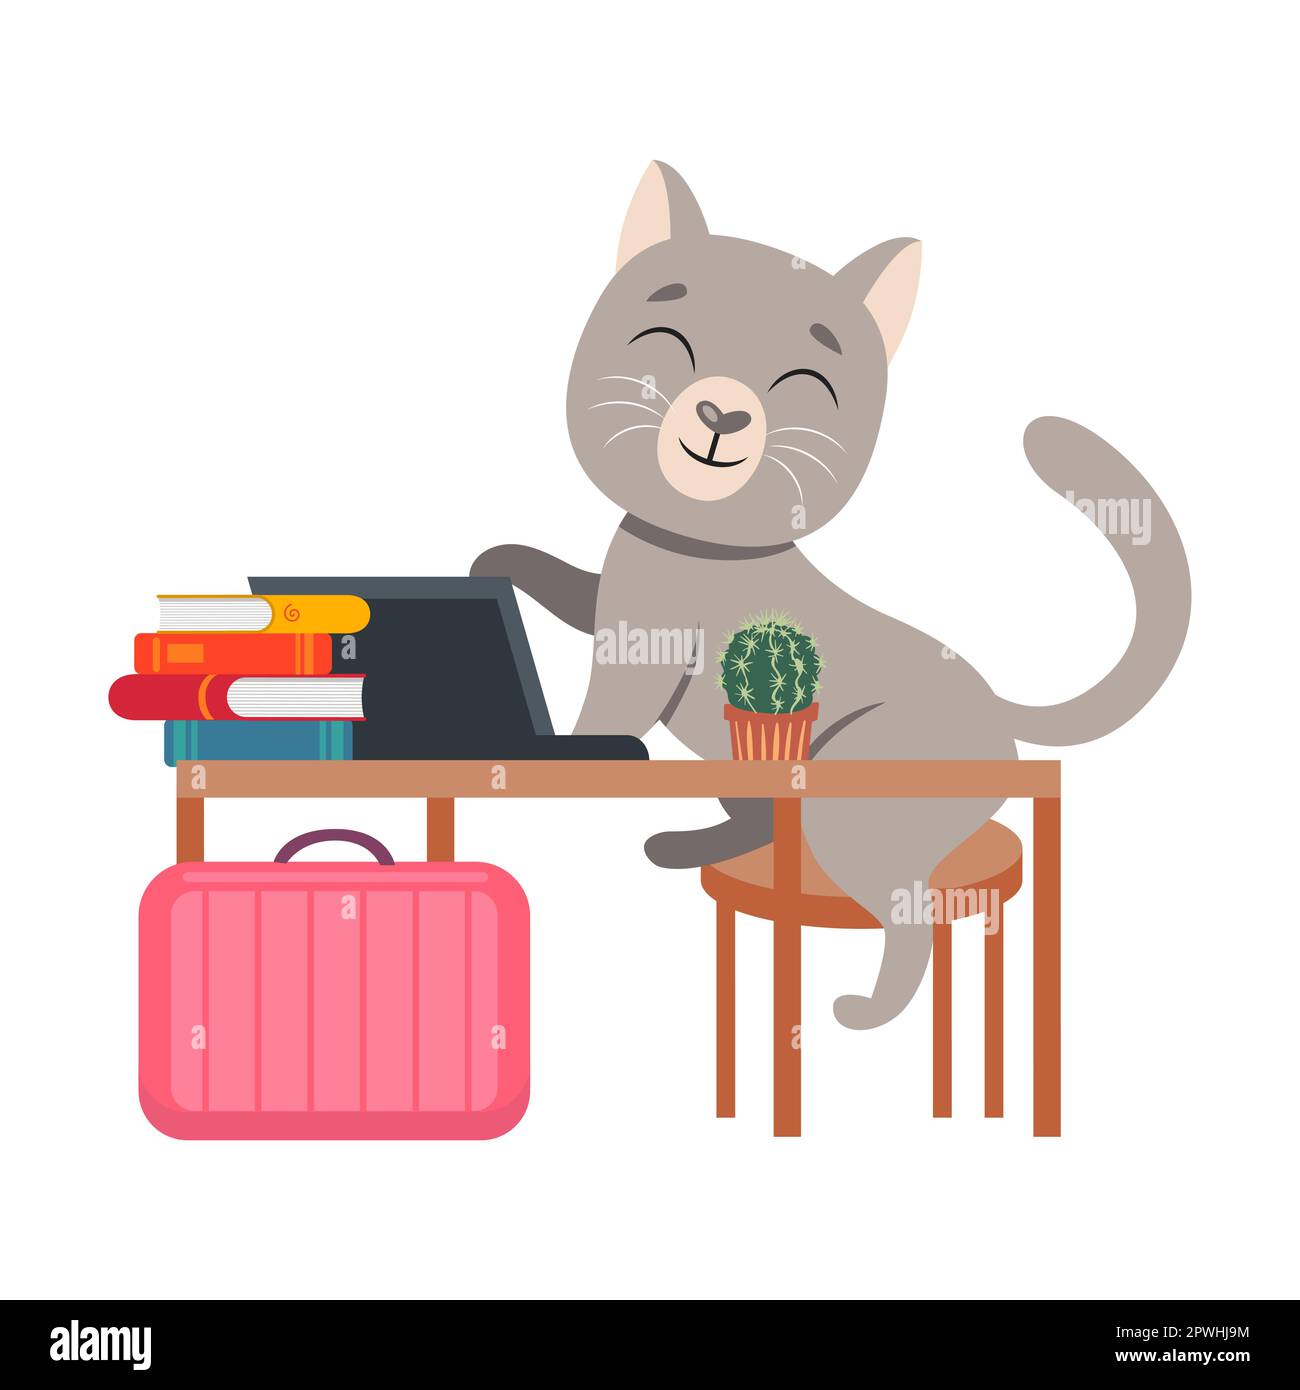 Kitten at the study desk. Cute animal character studying cartoon illustration isolated on white background. Education, school concept Stock Vector